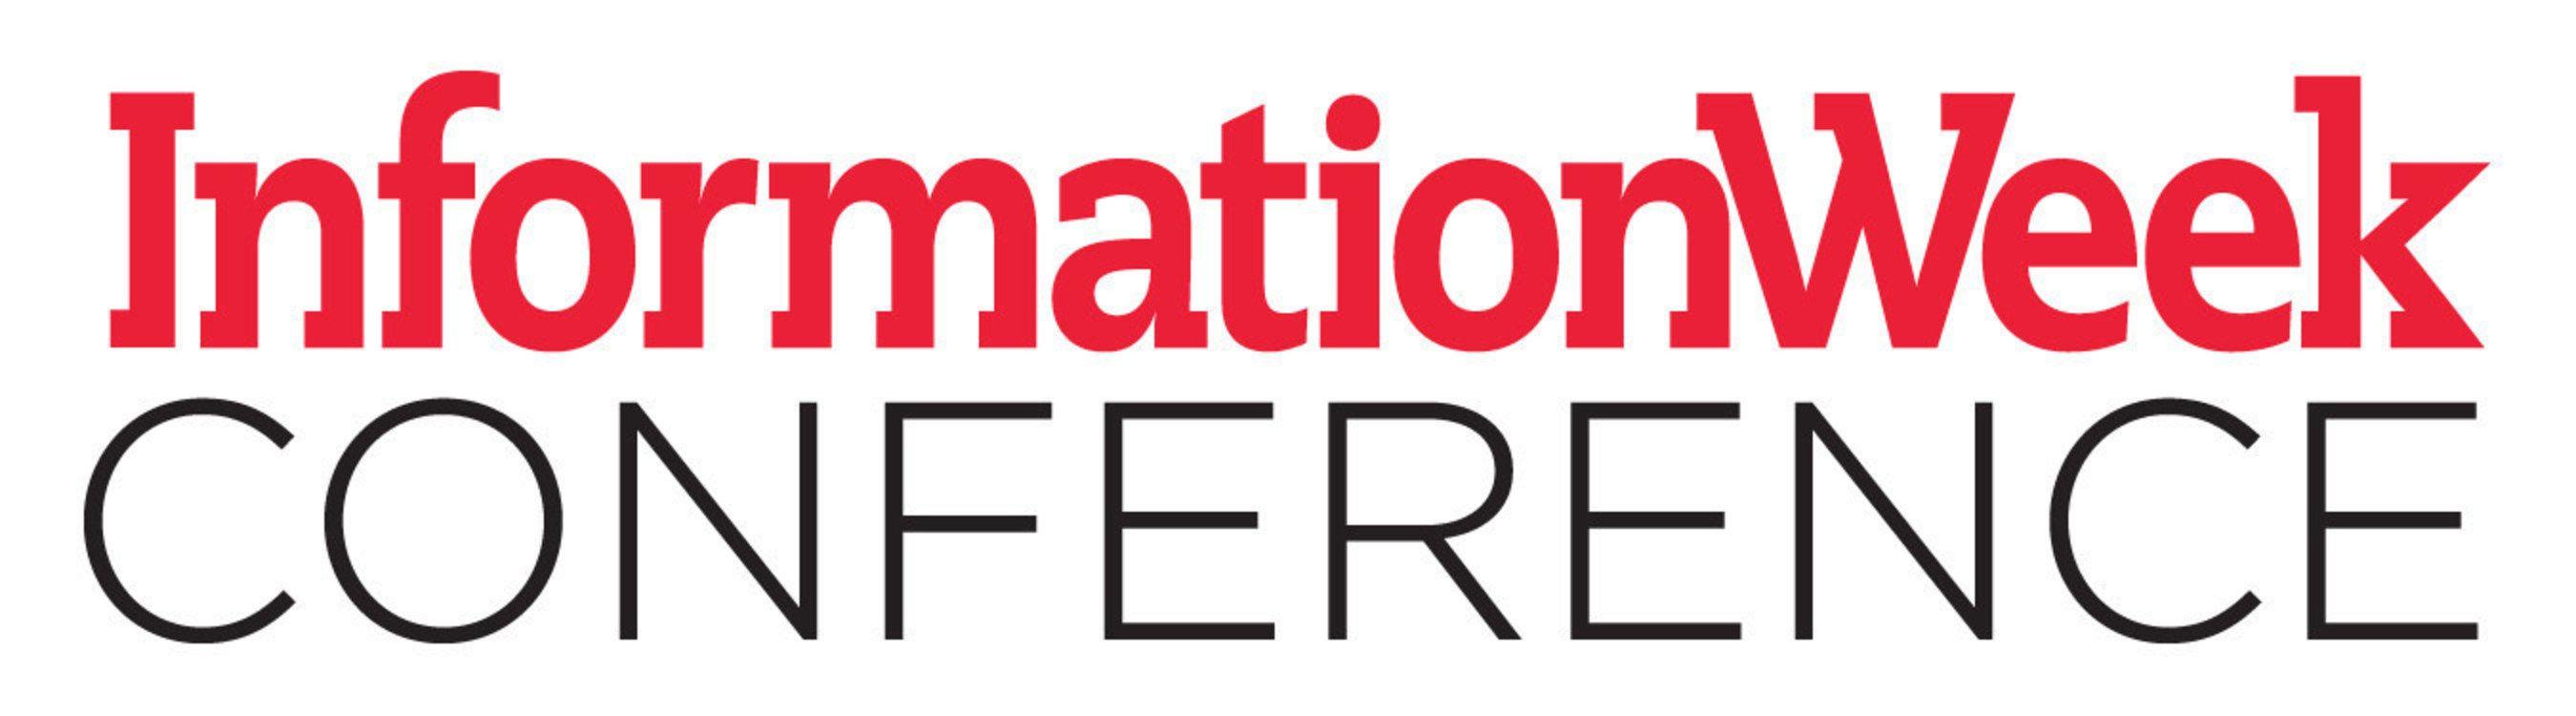 InformationWeek Logo - IT Without Borders: InformationWeek Conference Launches 2015 Program